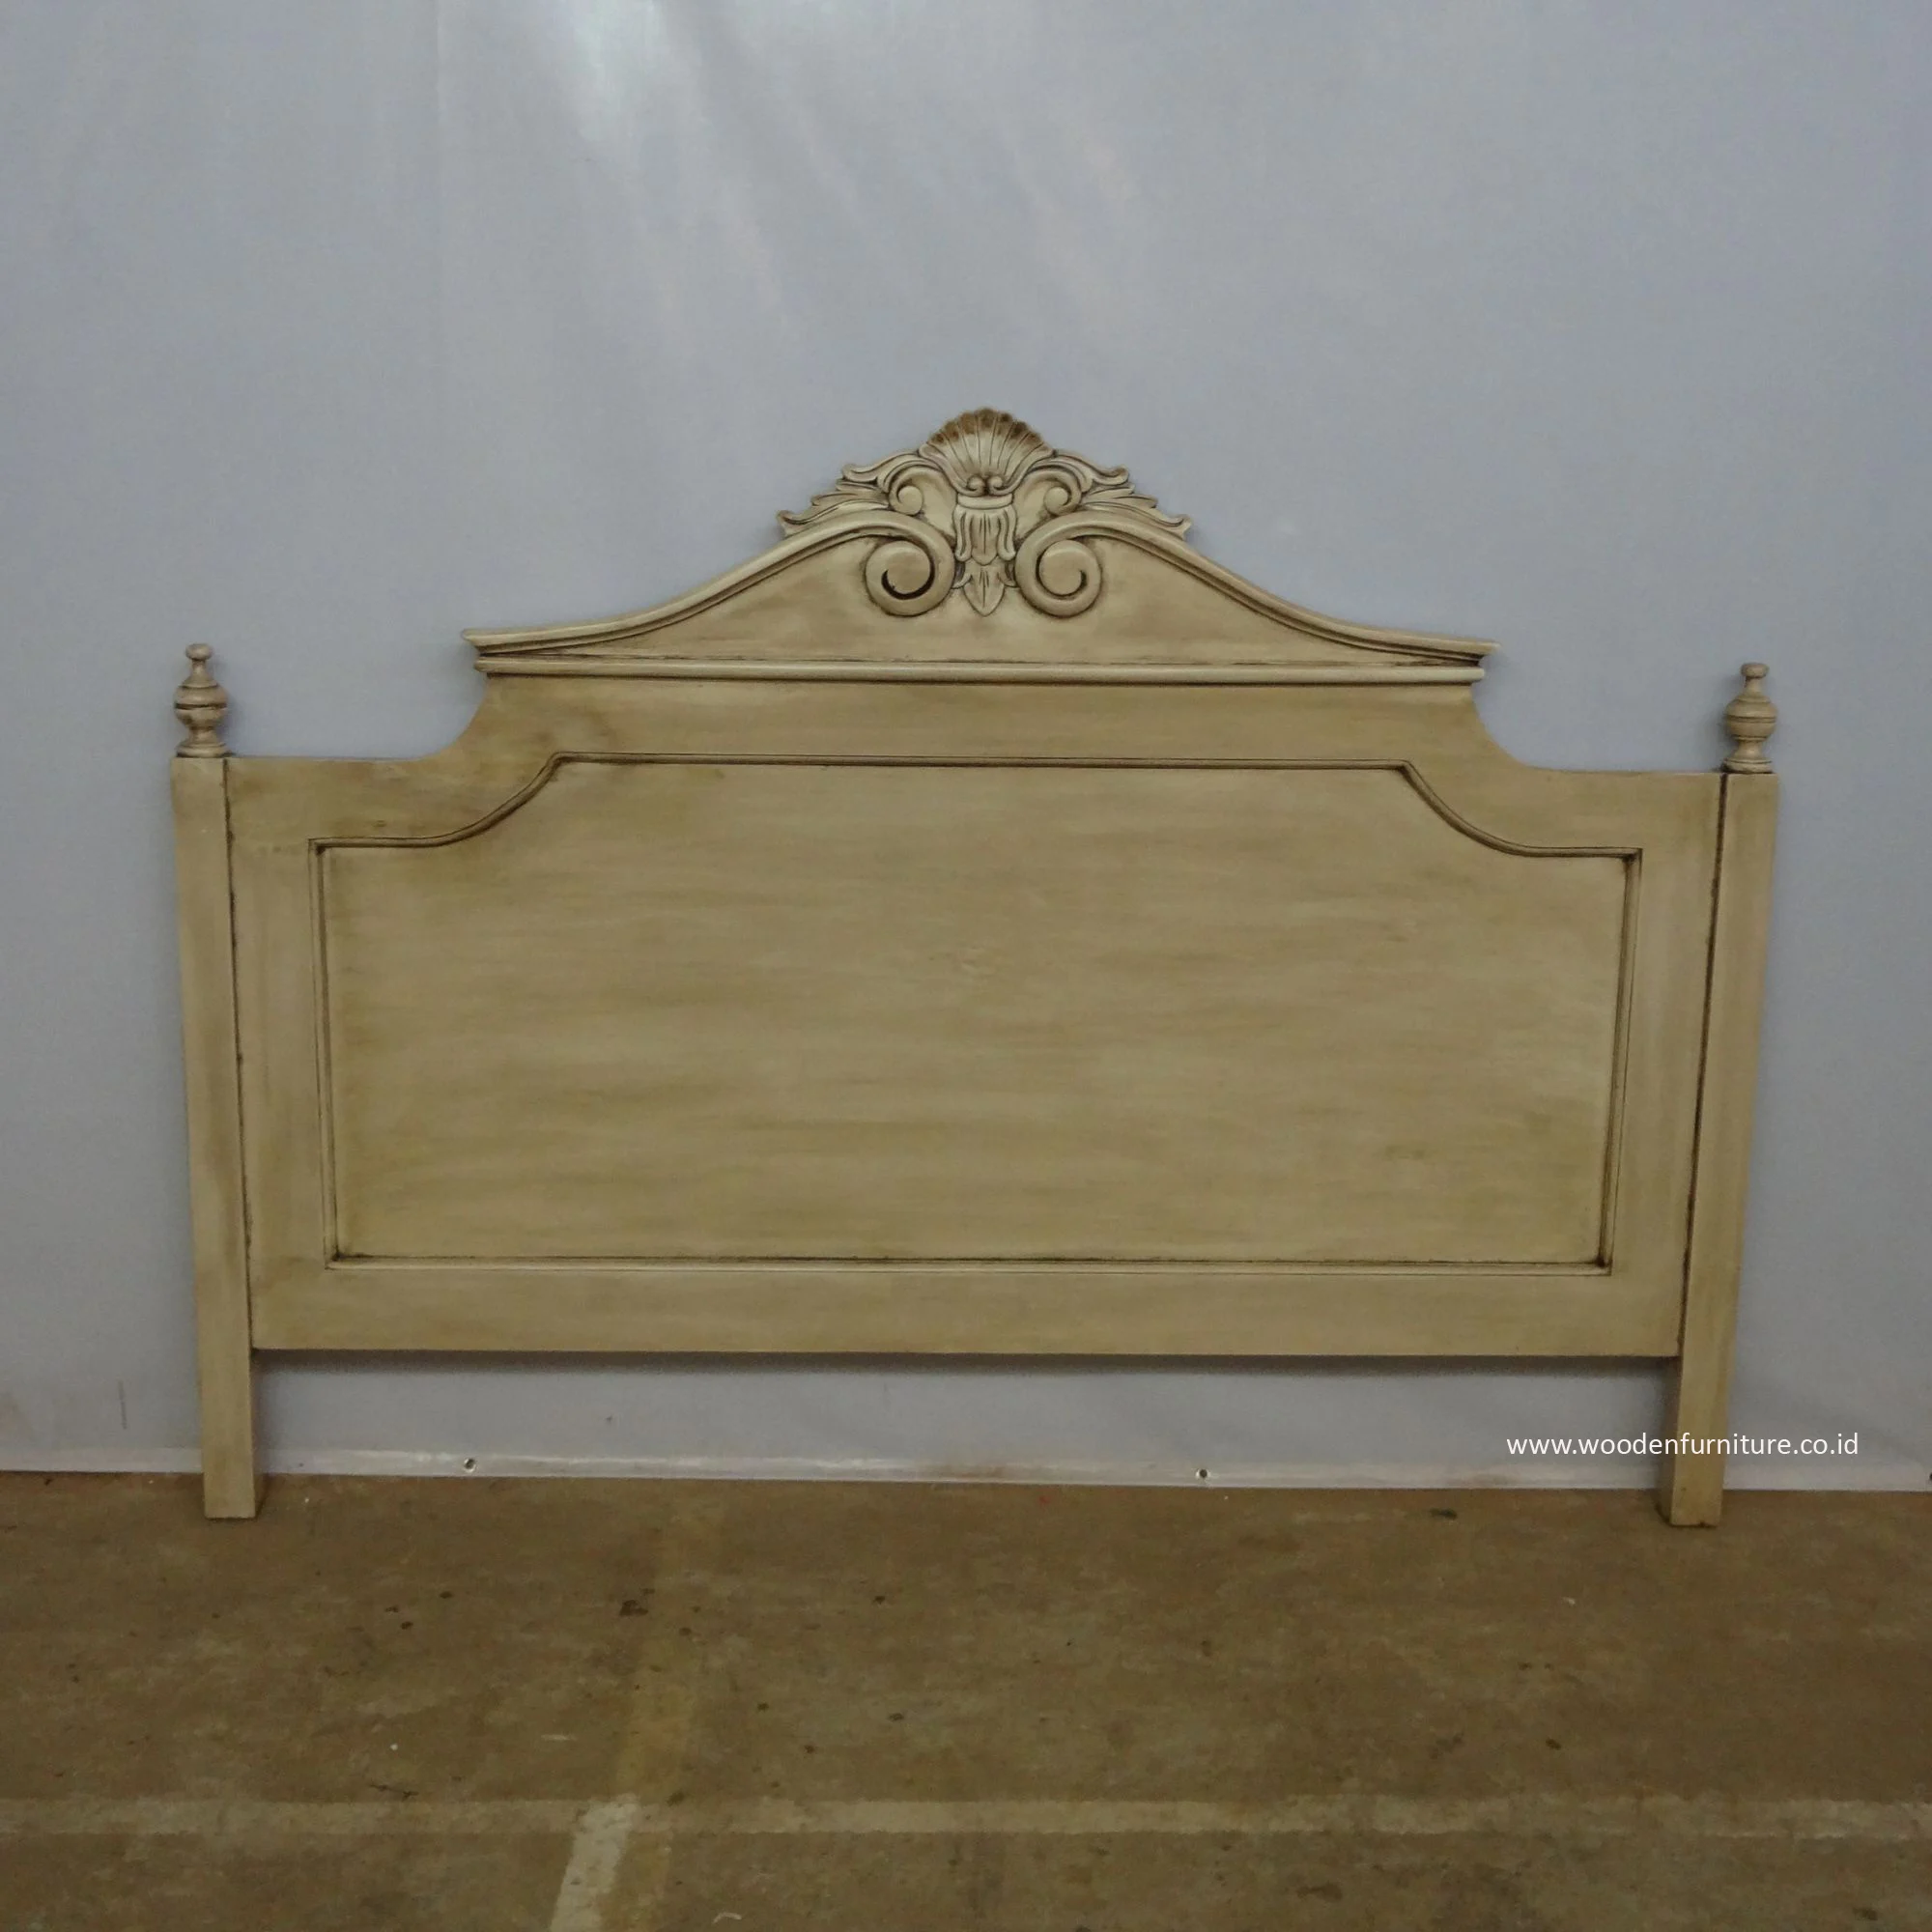 Antique Headboard French Style Bed Head Classic Bedroom Furniture European Style Home Furniture Wooden Headboard Buy French Style Bed Wooden Carved Headboard European Style Bedroom Furniture Product On Alibaba Com